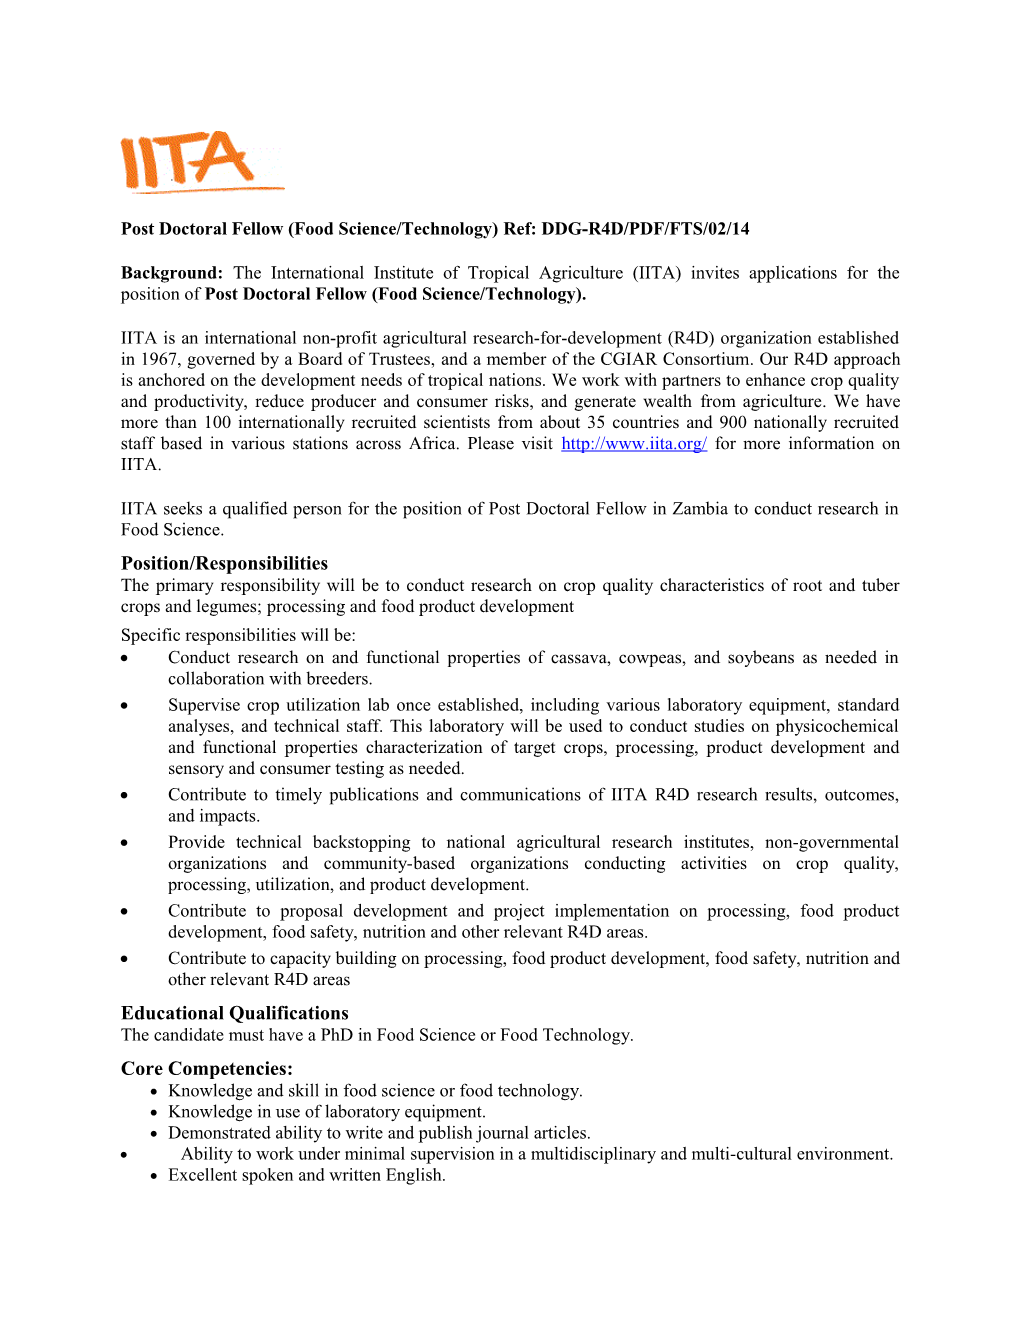 Post Doctoral Fellow (Food Science/Technology) Ref: DDG-R4D/PDF/FTS/02/14